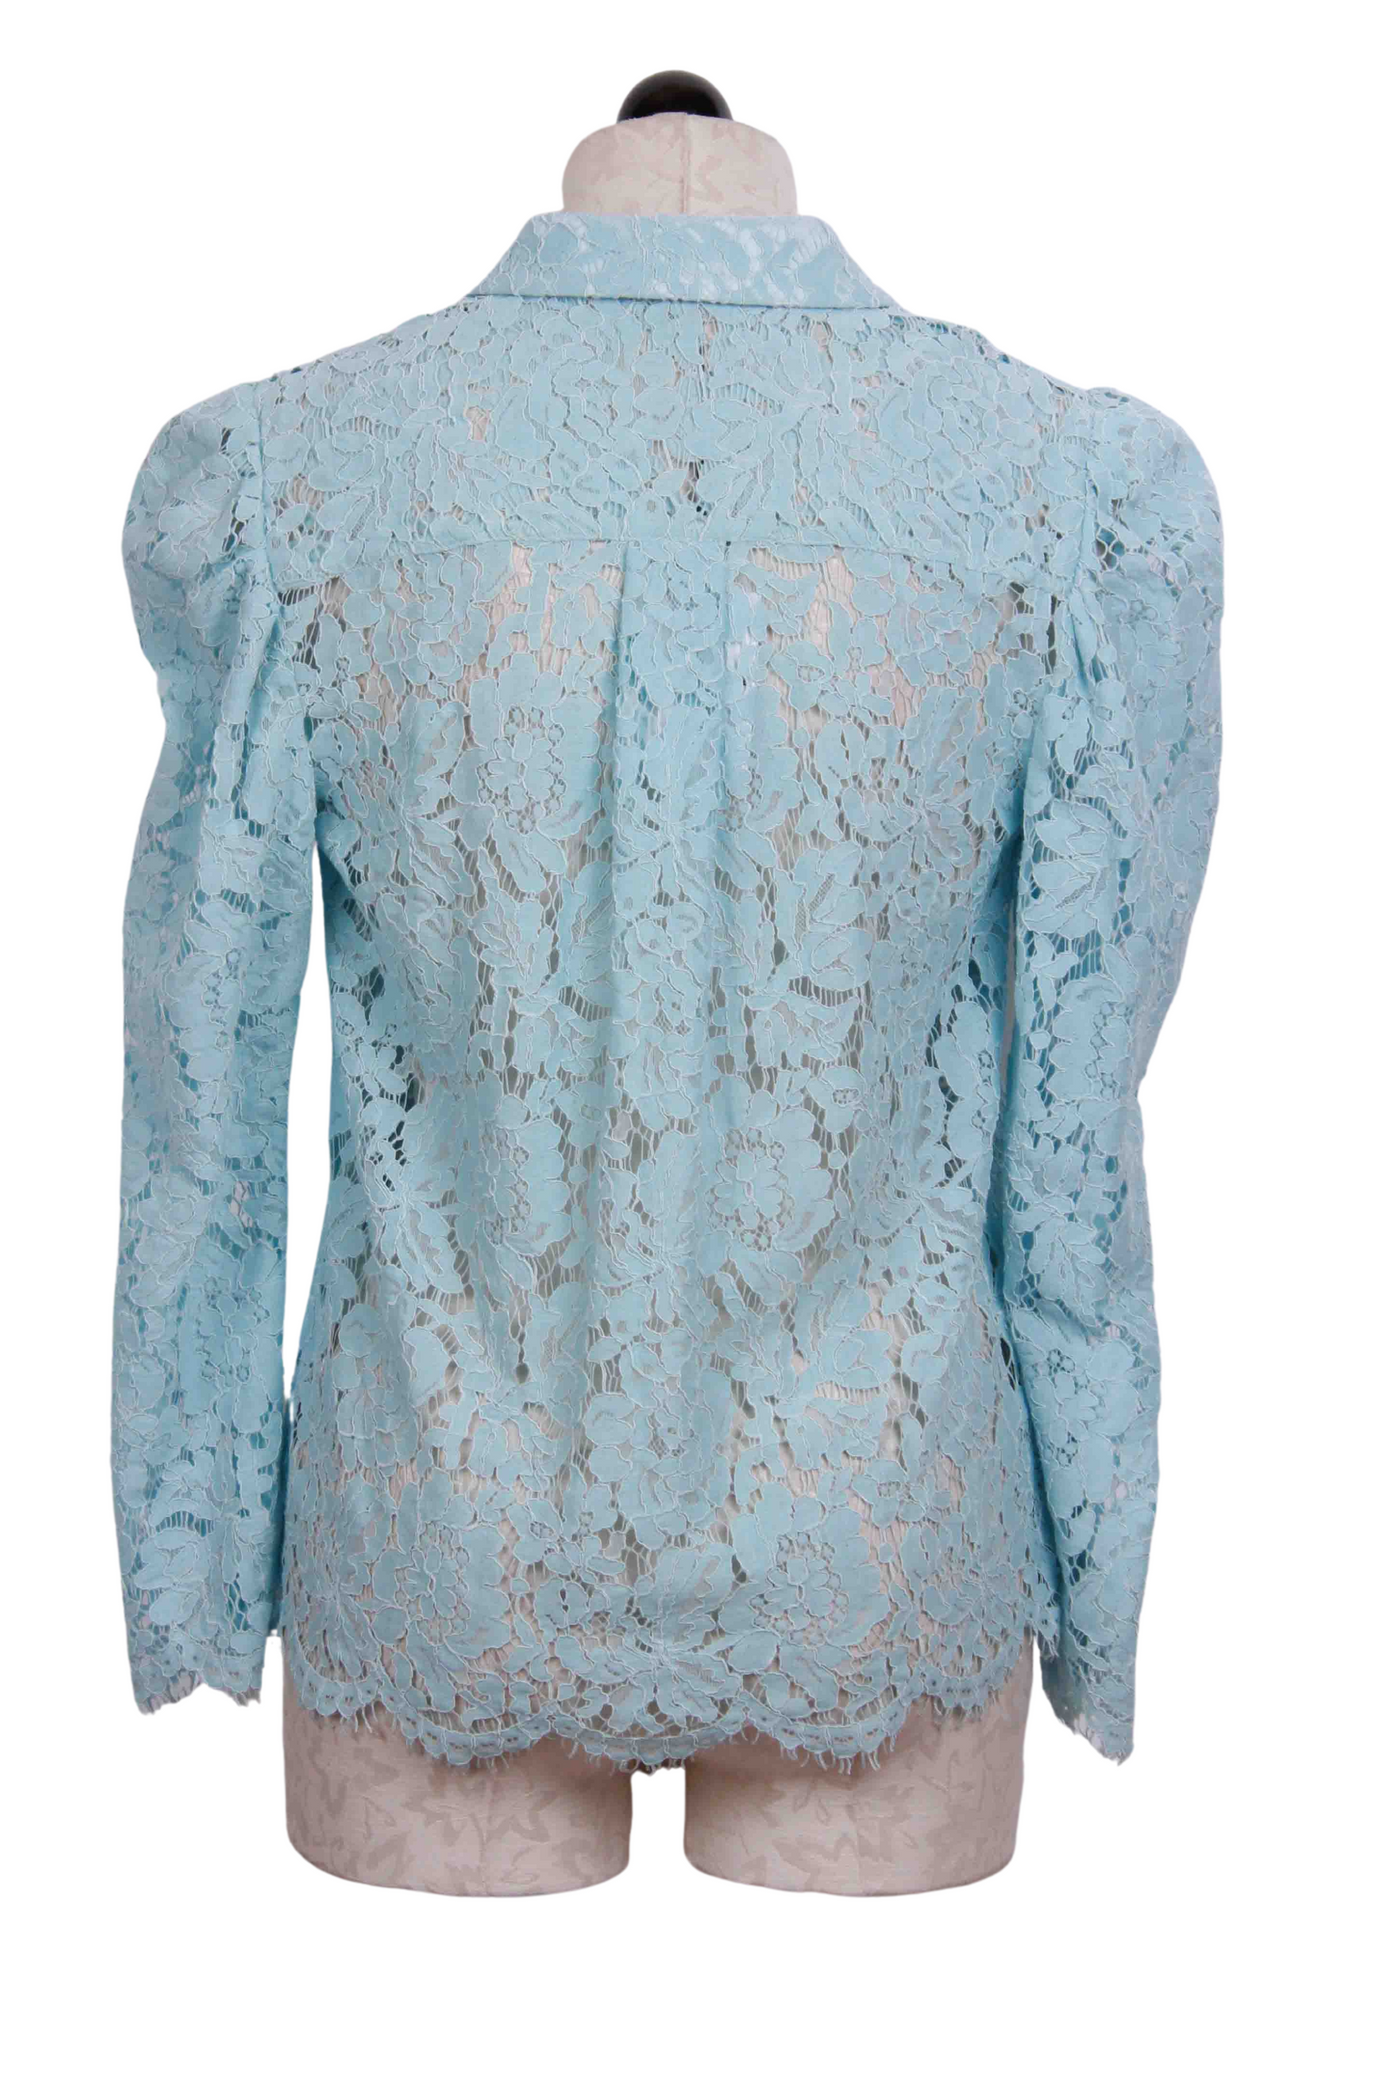 back view of French Blue Erika Lace Blouse by Generation Love